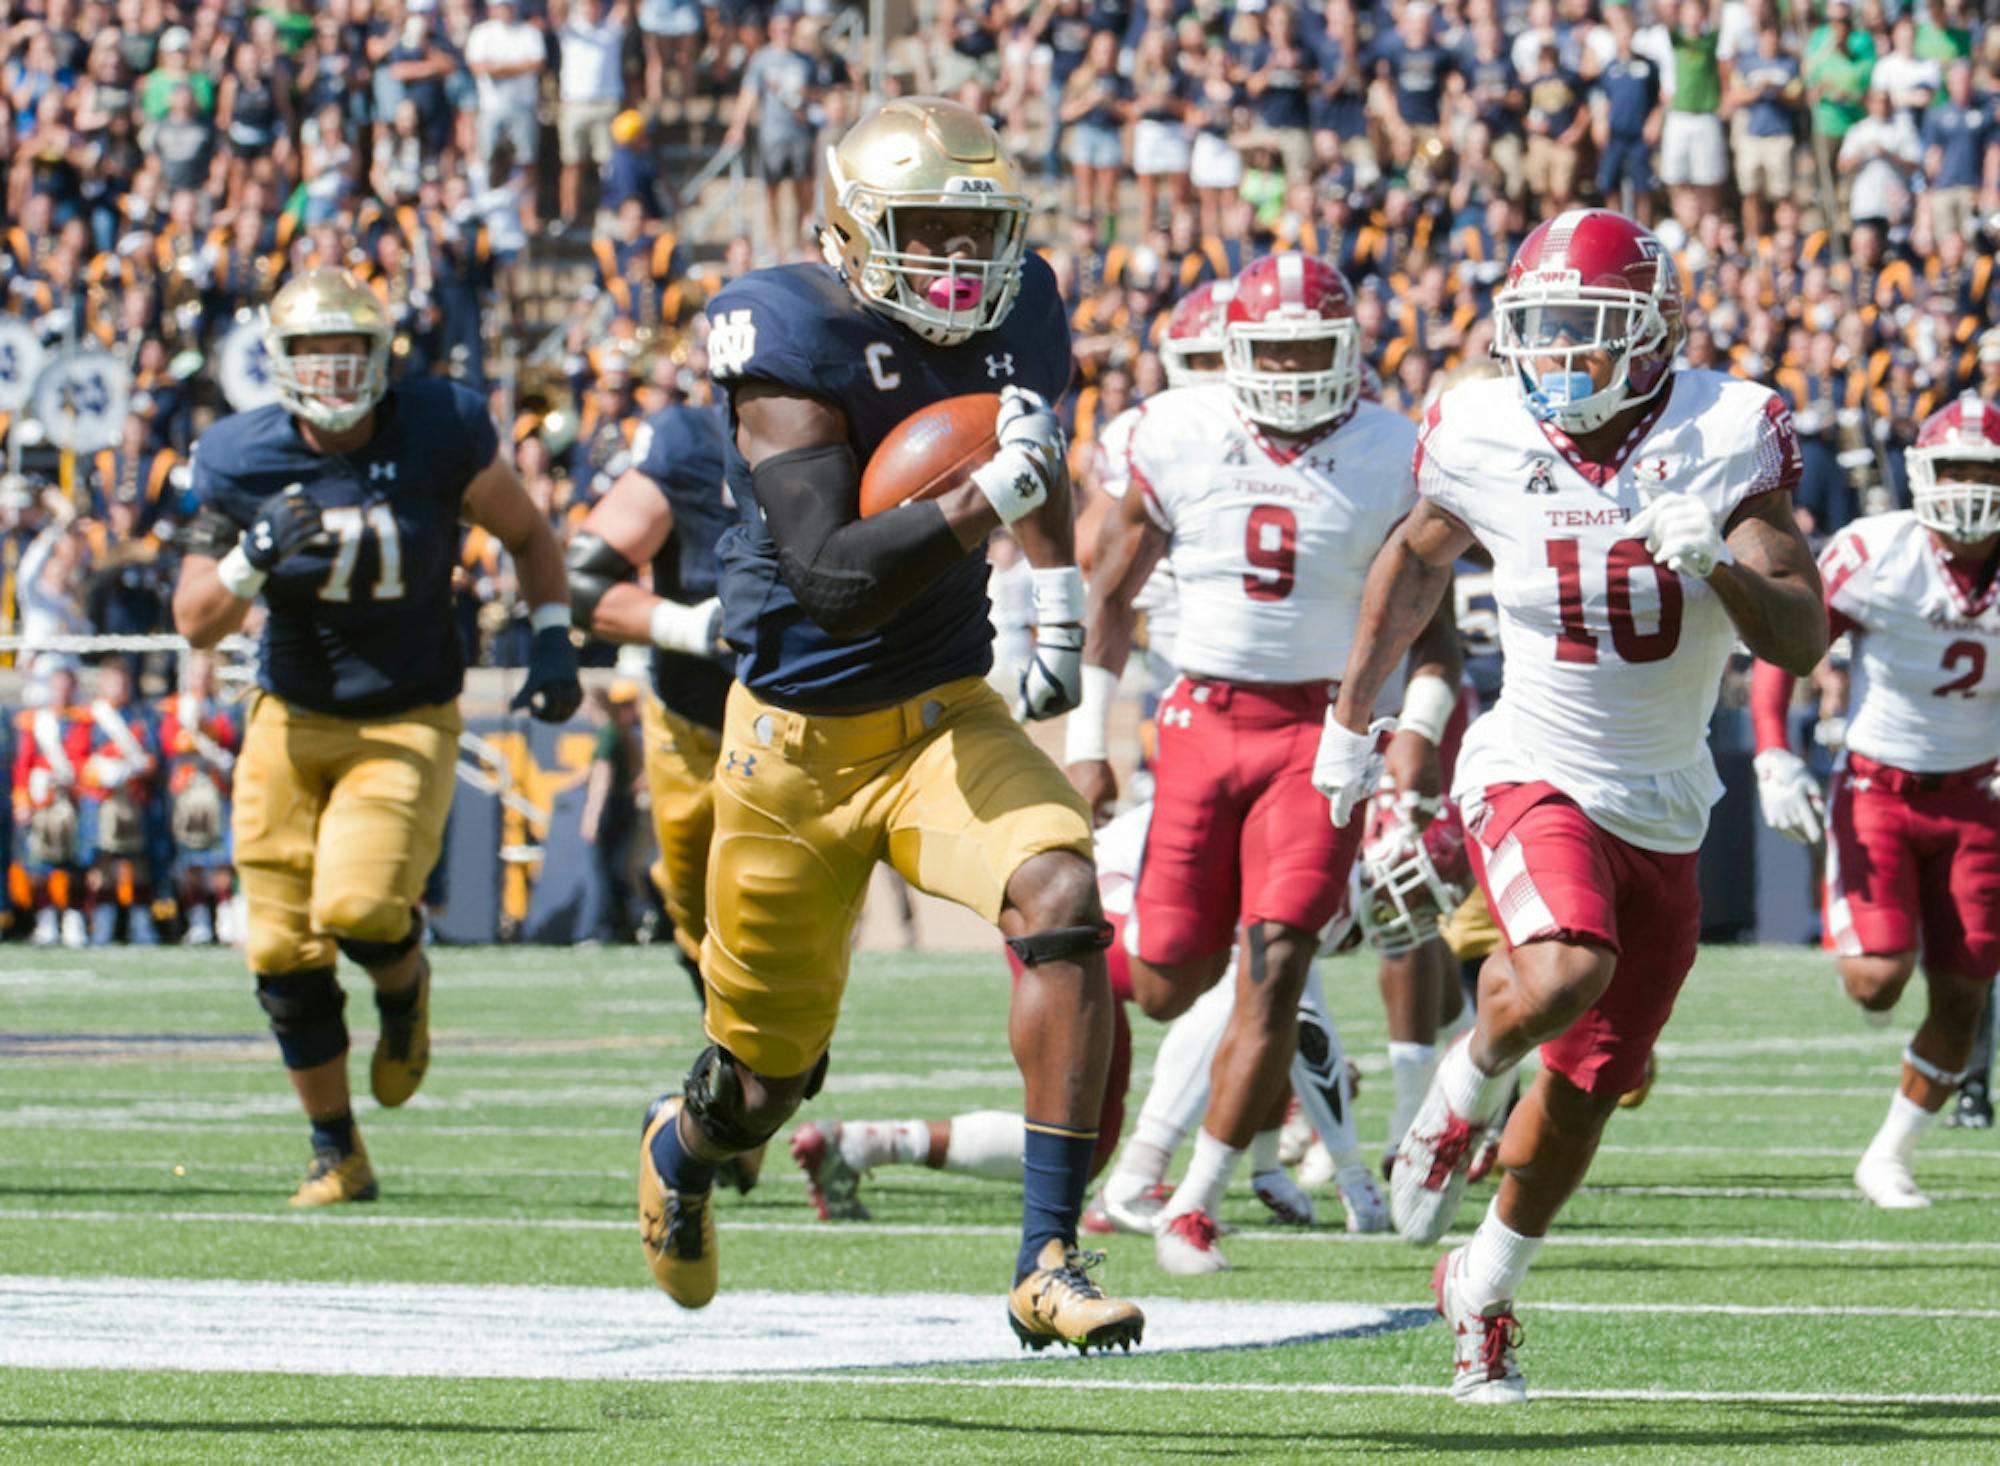 Josh Adams runs upfield during Notre Dame’s 49-16 win over Temple on Saturday at Notre Dame Stadium. Adams has nine 100-yard rushing performances over the course of his Notre Dame career.